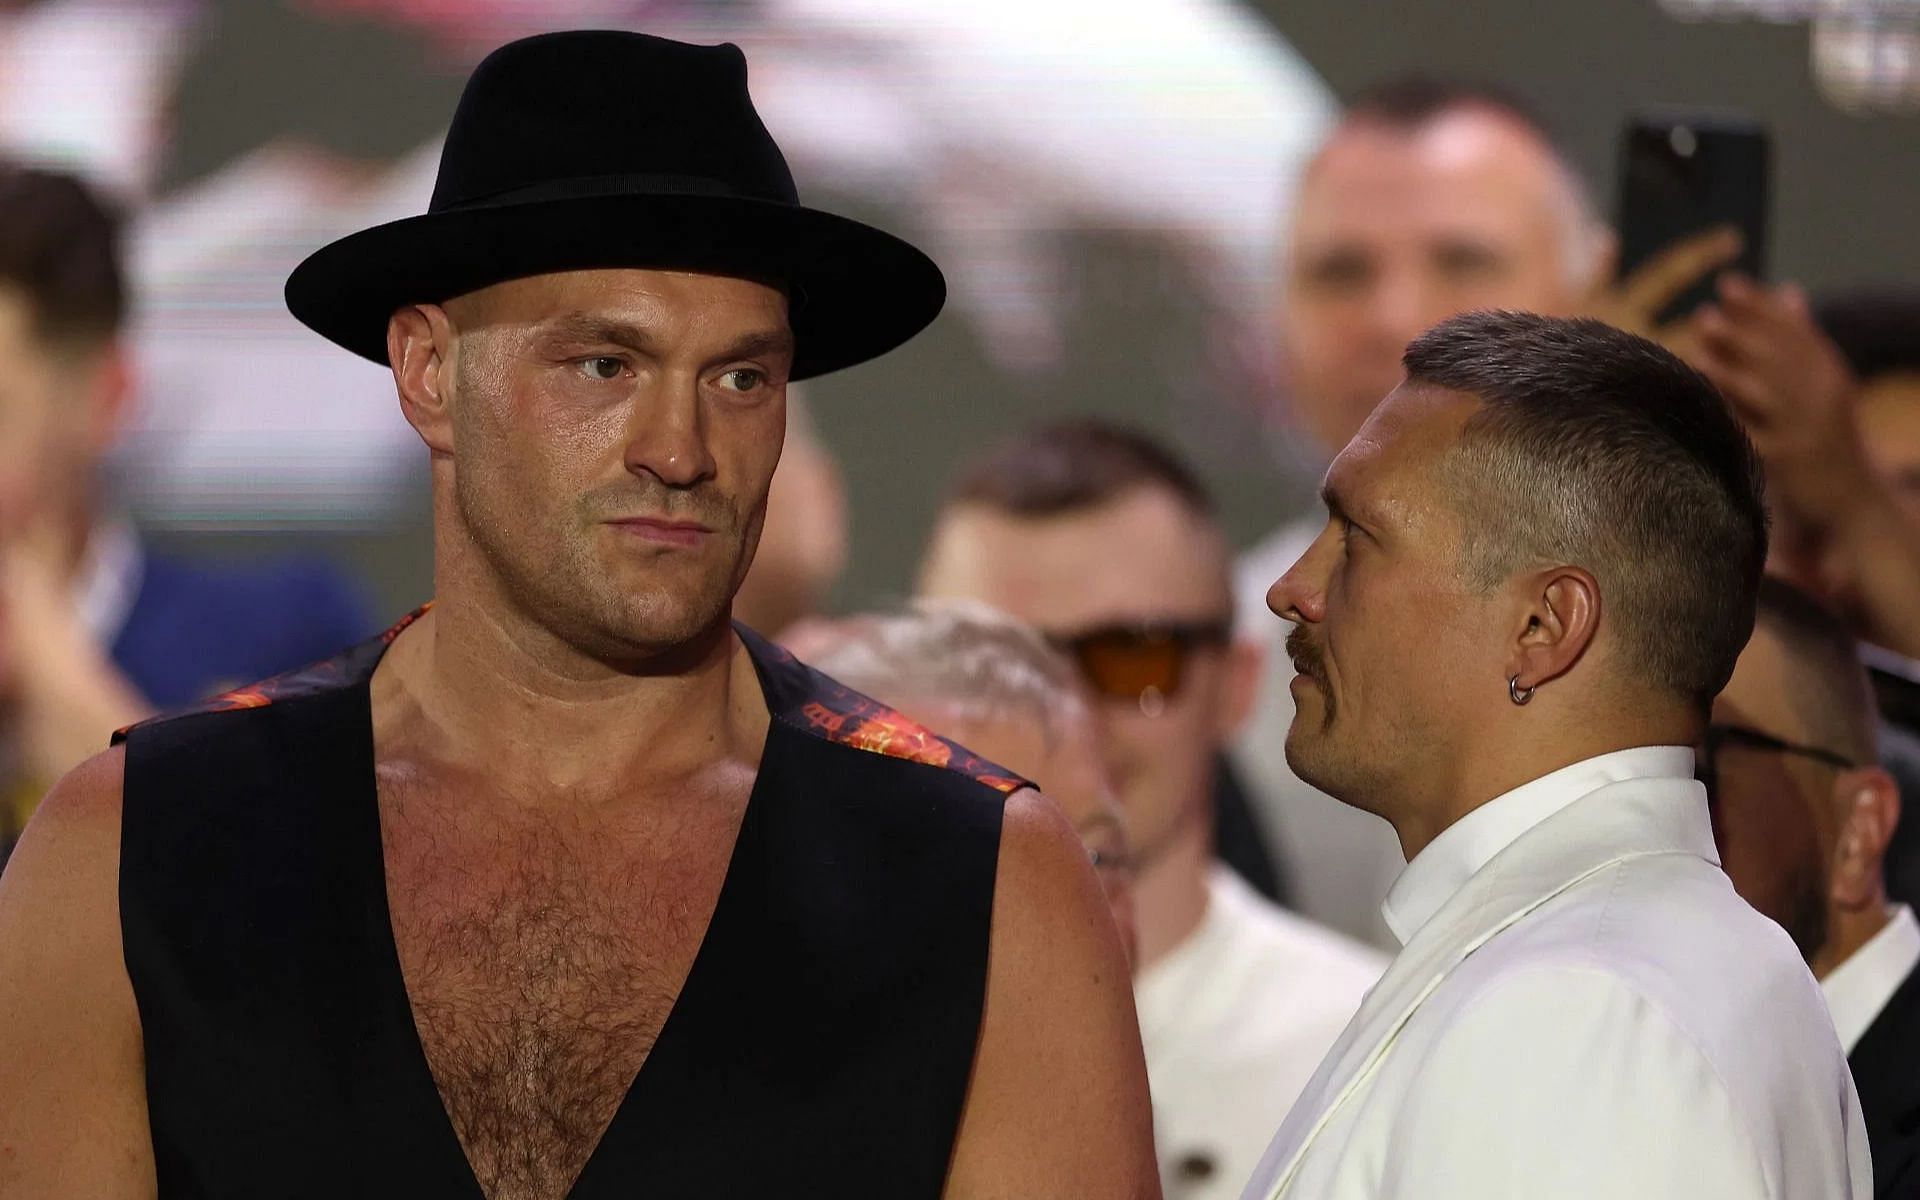 Former trainer of Tyson Fury (left) speaks out after concerns of his new fighting weight ahead of clash with Oleksandr Usyk (right) [Image Courtesy: @GettyImages]